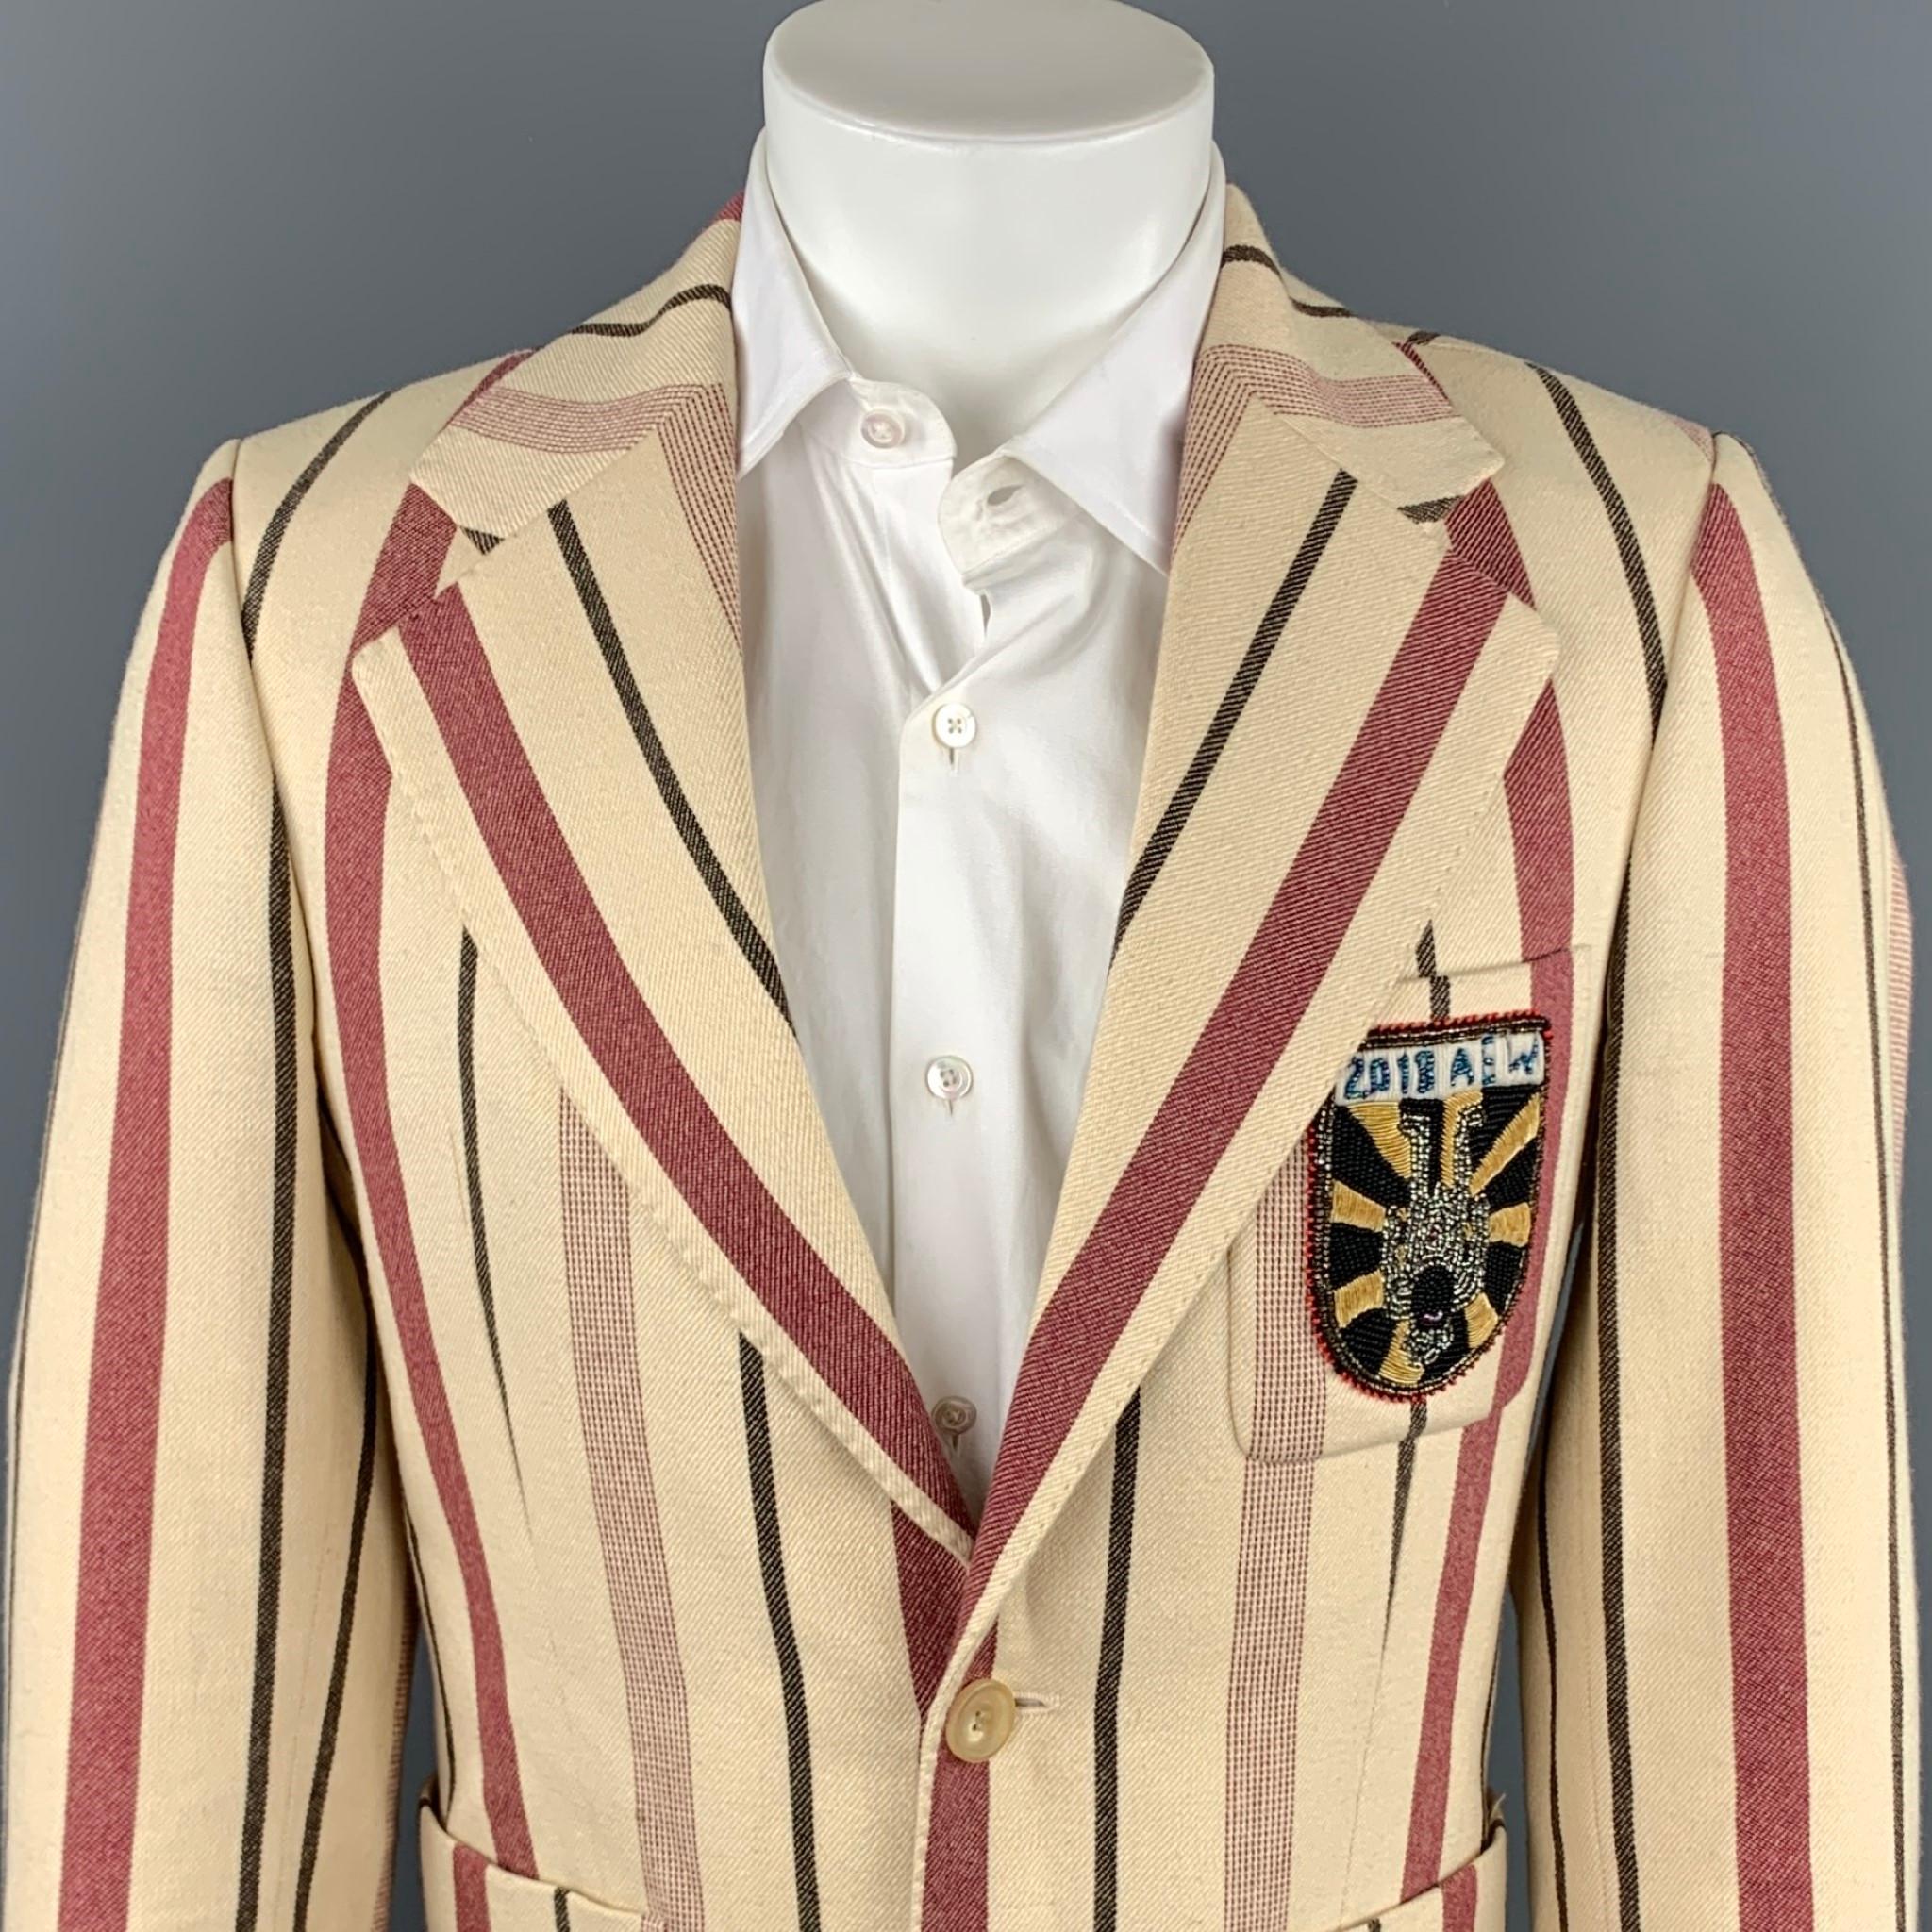 AESTHETICTERRORISTS by WALTER VAN BEIRENDONCK sport coat comes in a burgundy & cream vertical stripe wool with a full liner featuring a notch lapel, upside-down beaded patch, front pockets, and a double button closure.

Very Good Pre-Owned